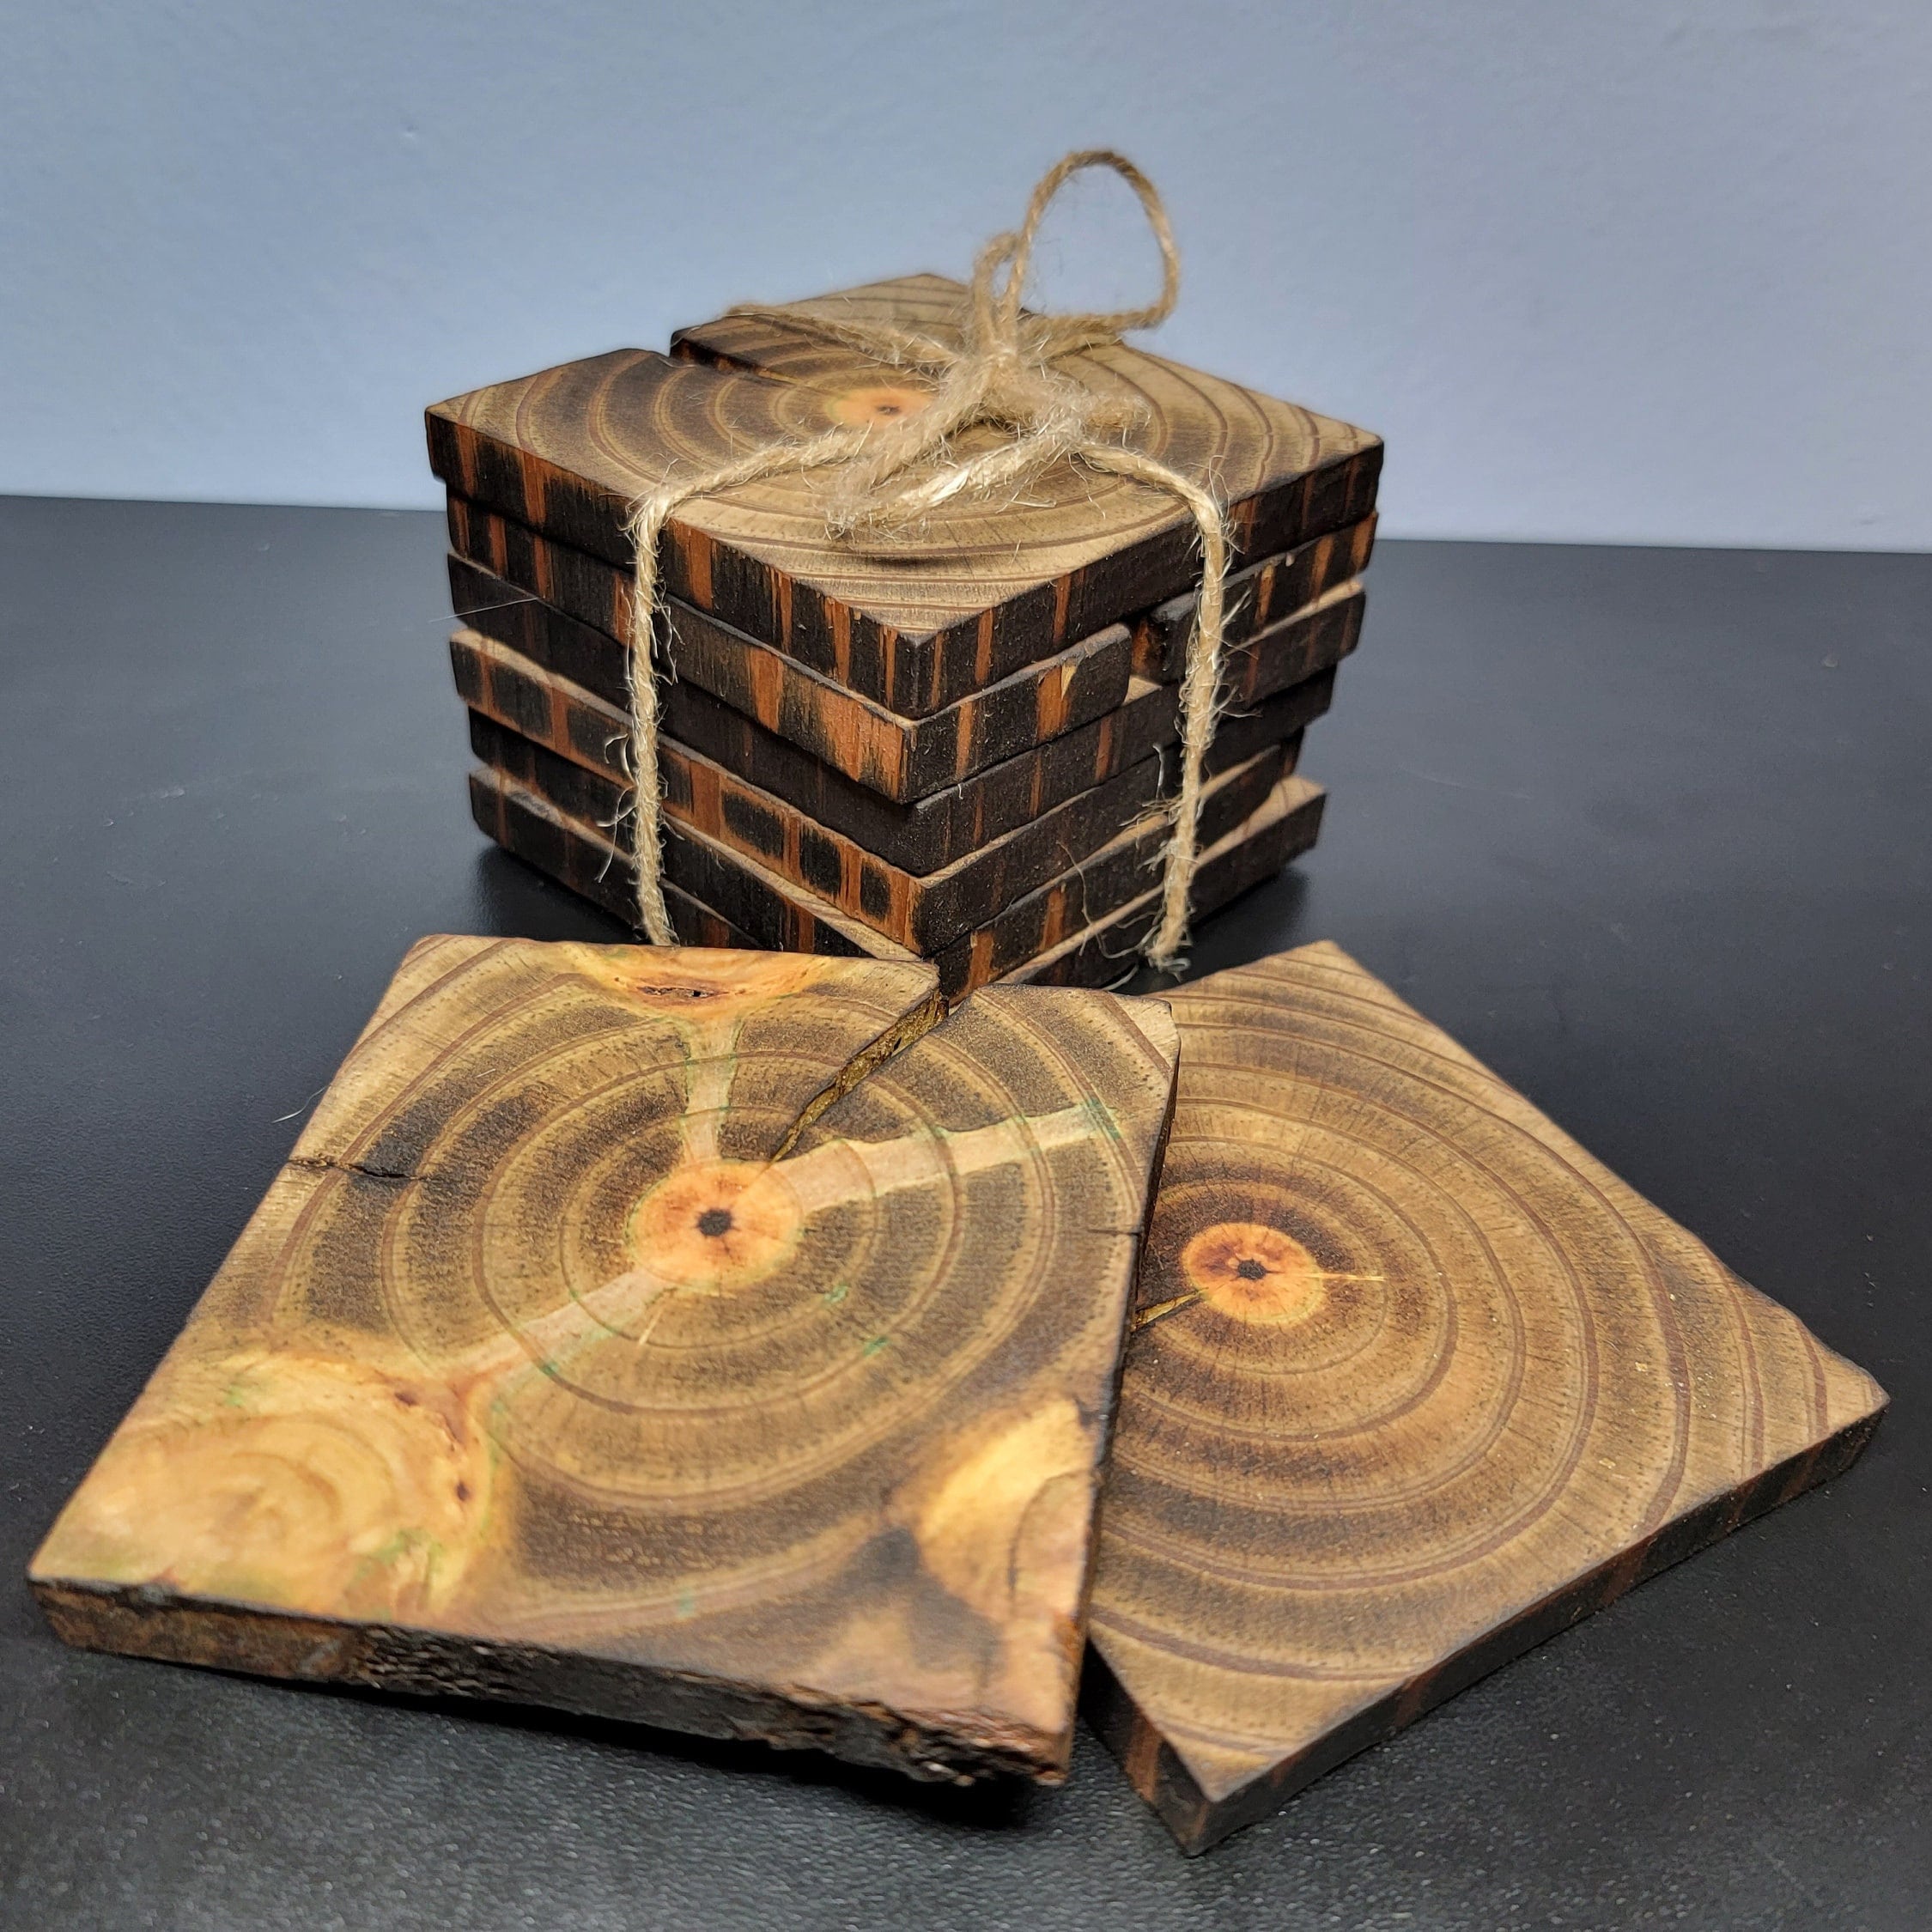 Set of 4, 4'' Rustic Wood Coasters, Wooden Drink Coasters, Hostess Gift,  Coffee Table Décor 